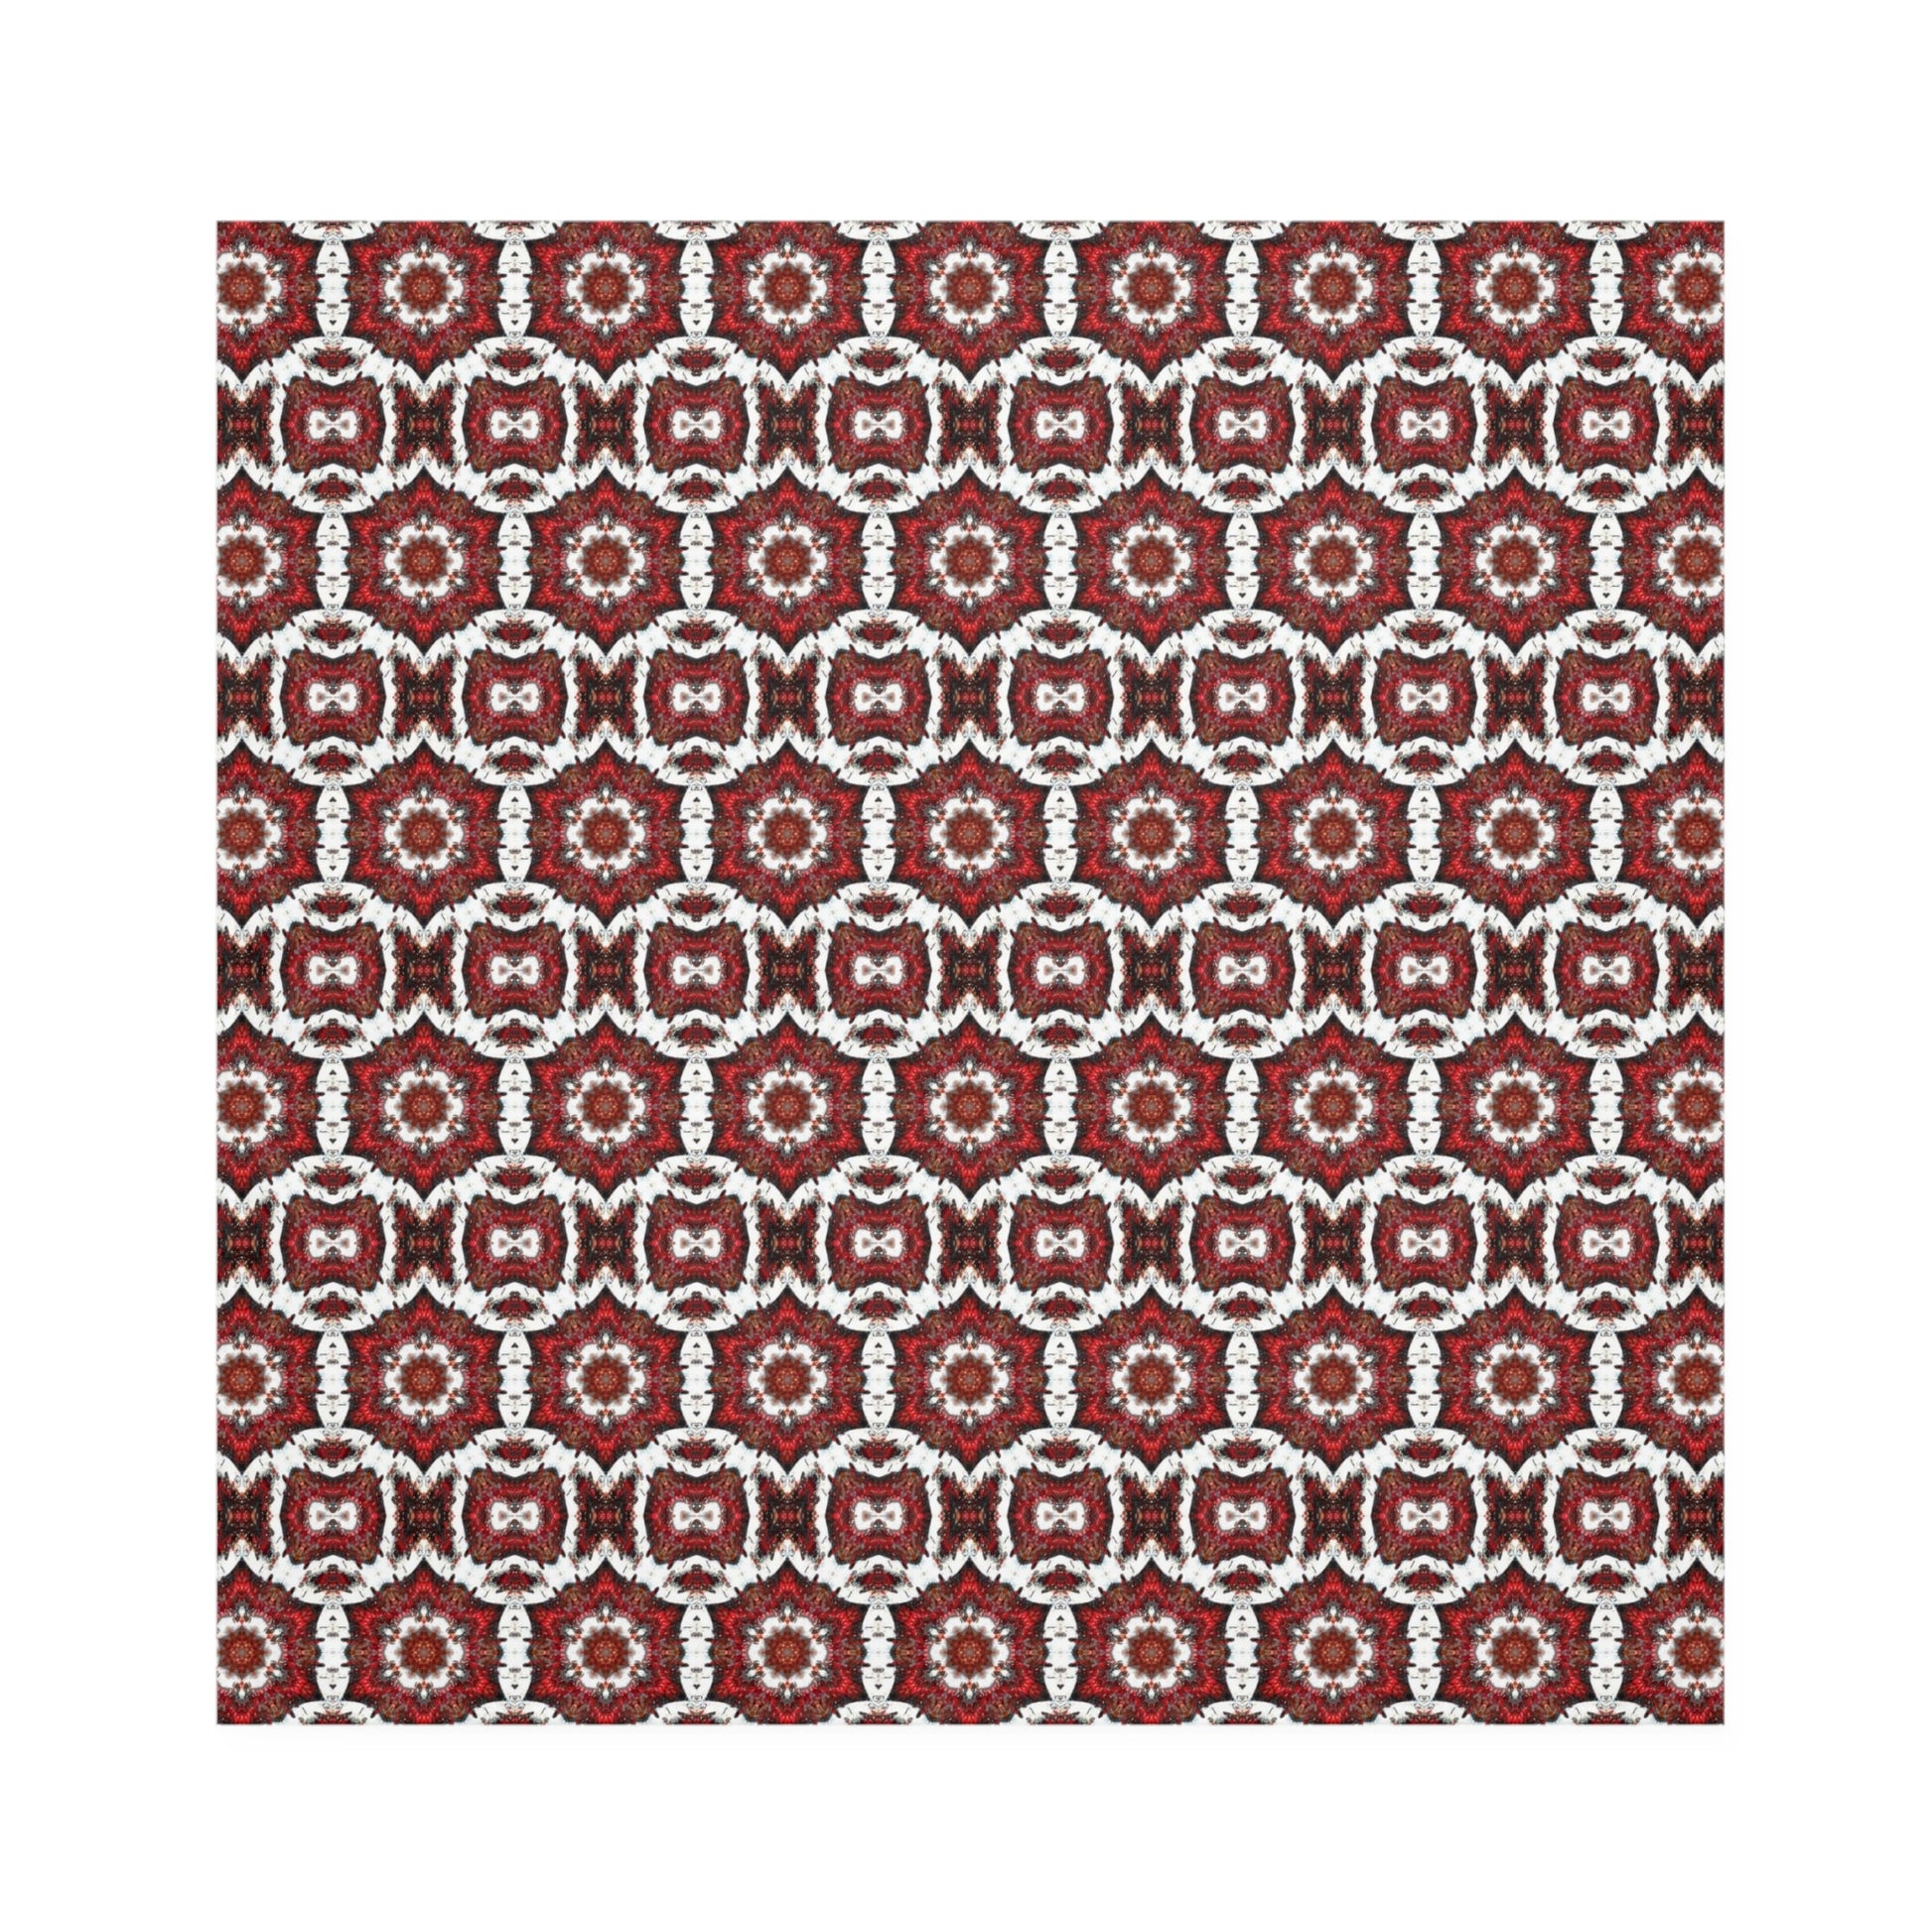 cloth dinner napkins with red and white festive print